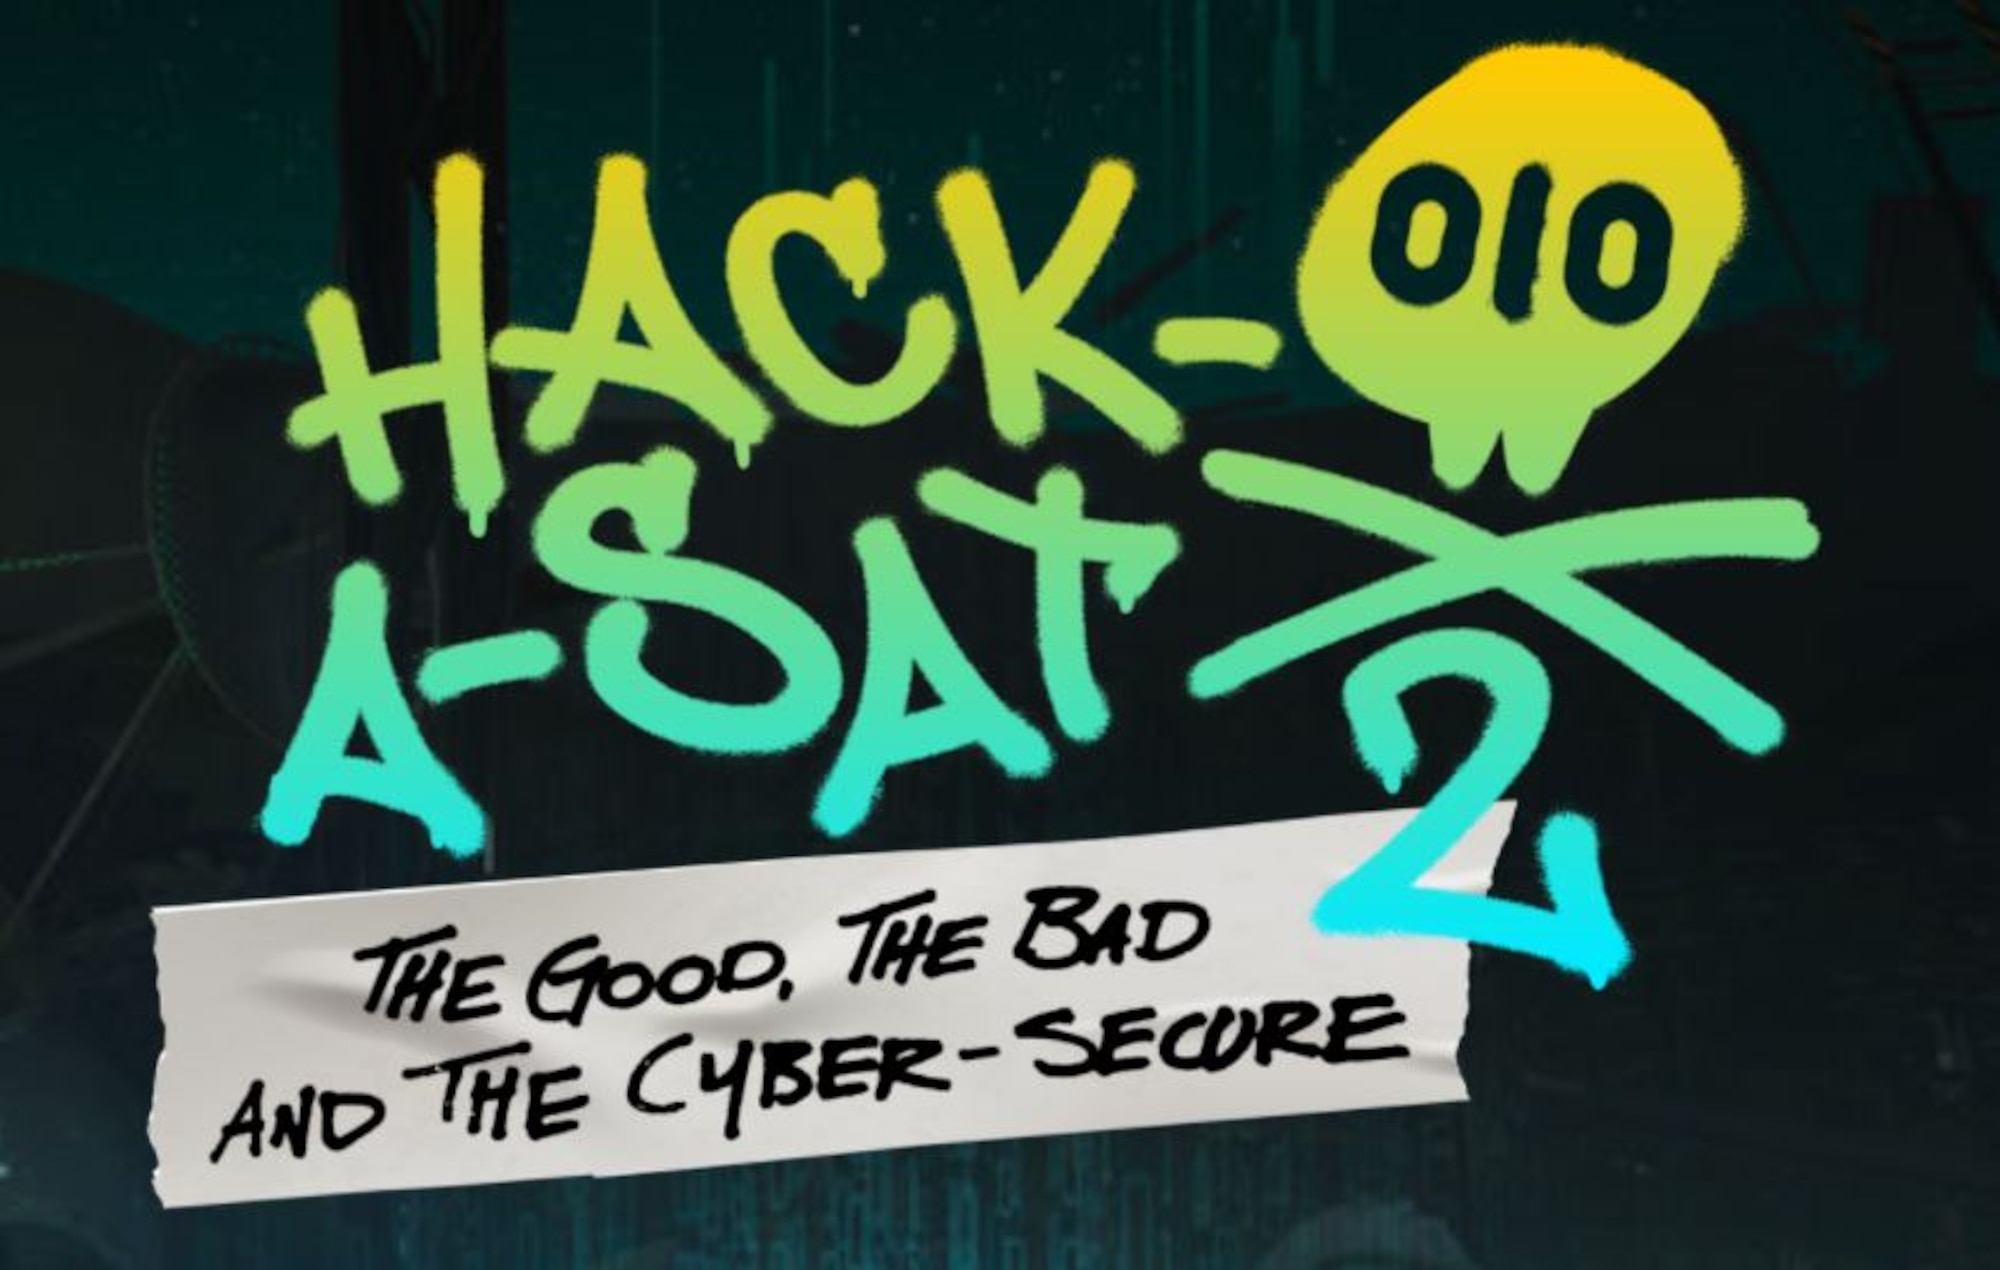 Hack-A-Sat is a virtual competition sponsored by the AFRL and SSC.  The event made its debut in 2020 during the largest cyber-hacking conference in the world, DEF CON Safemode. (Courtesy graphic)